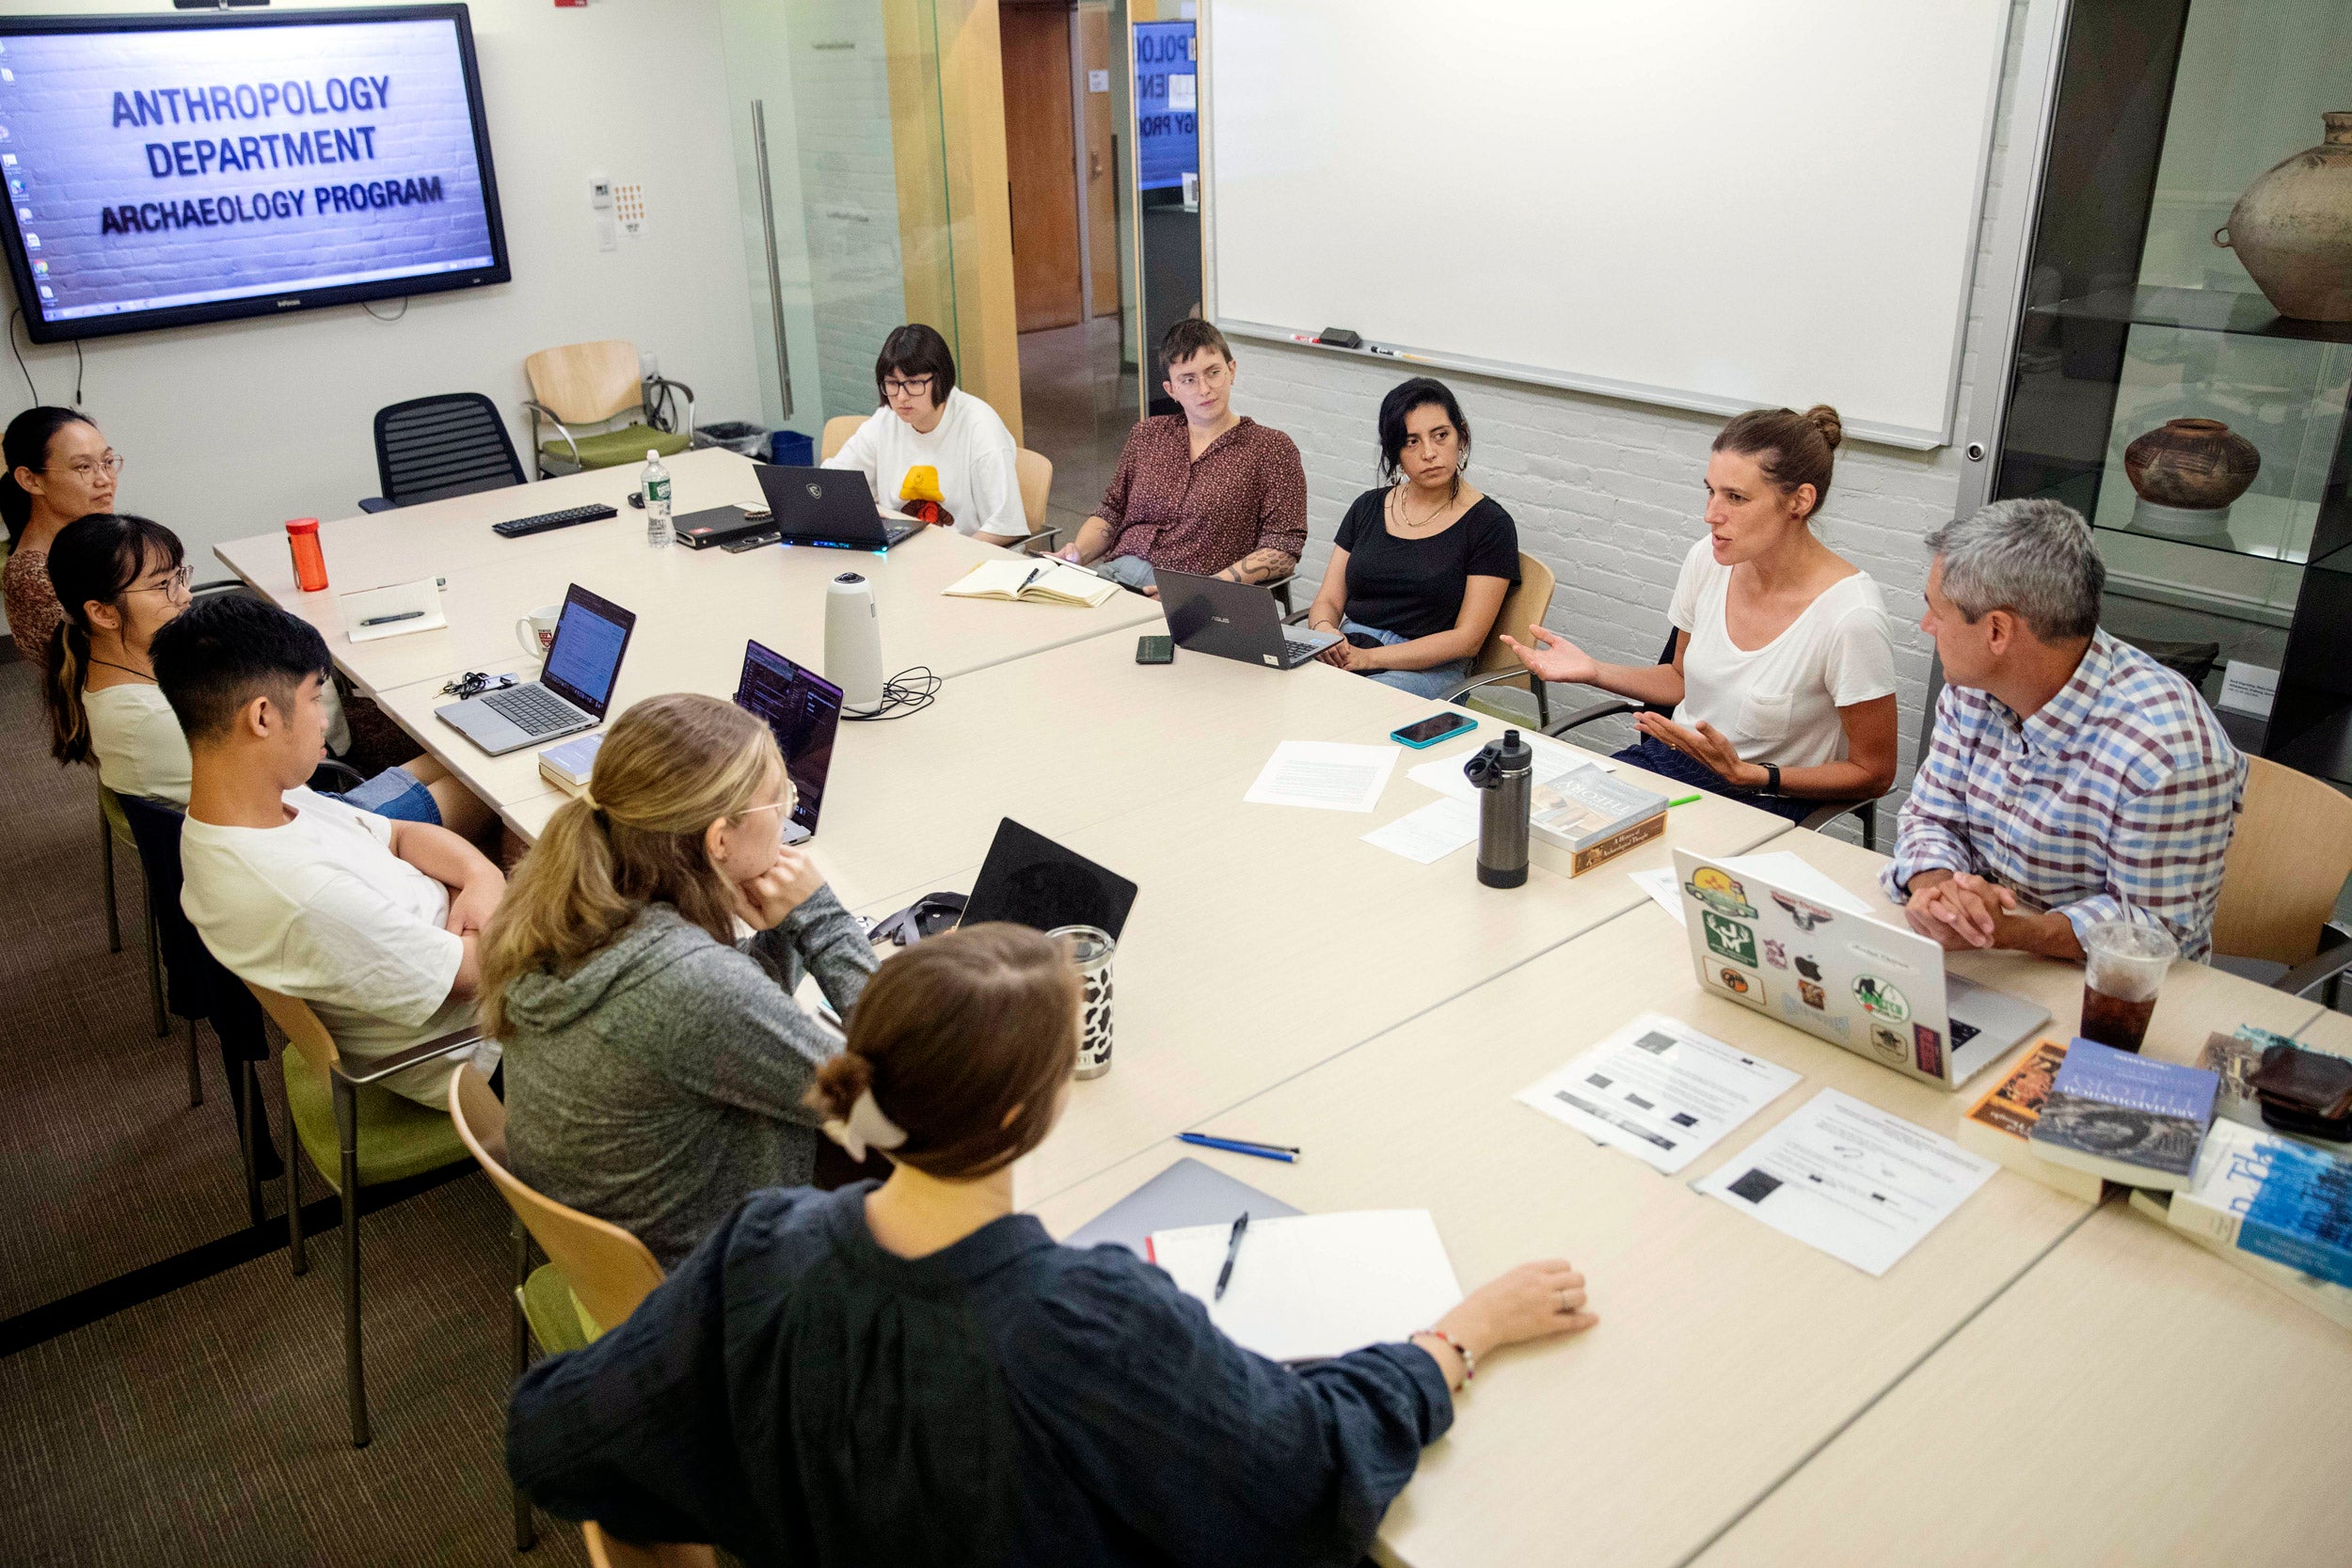 Amy E. Clark, assistant professor of Anthropology, and Matthew Liebmann, Peabody Professor of American Archaeology and Ethnology, team up to teach “Archaeological Method and Theory” in the Peabody Museum.